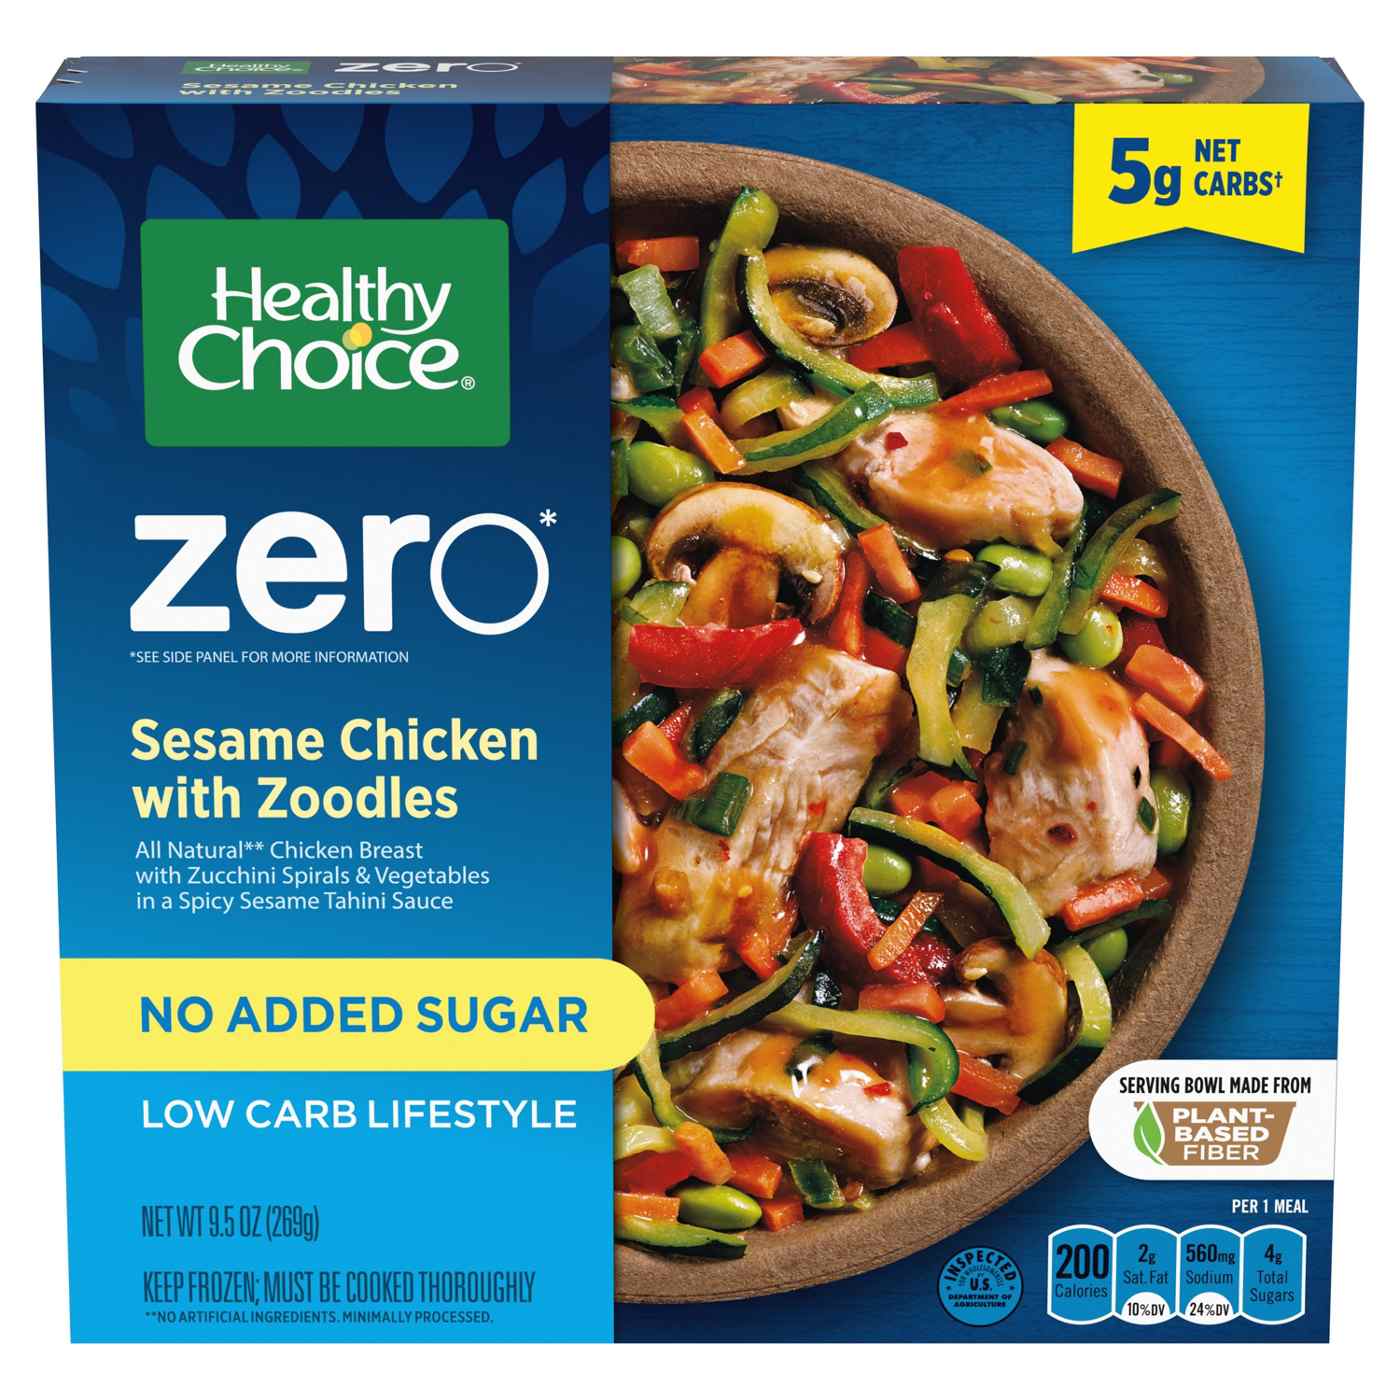 Healthy Choice Zero Low Carb Lifestyle Sesame Chicken & Zoodles Frozen Meal; image 1 of 7